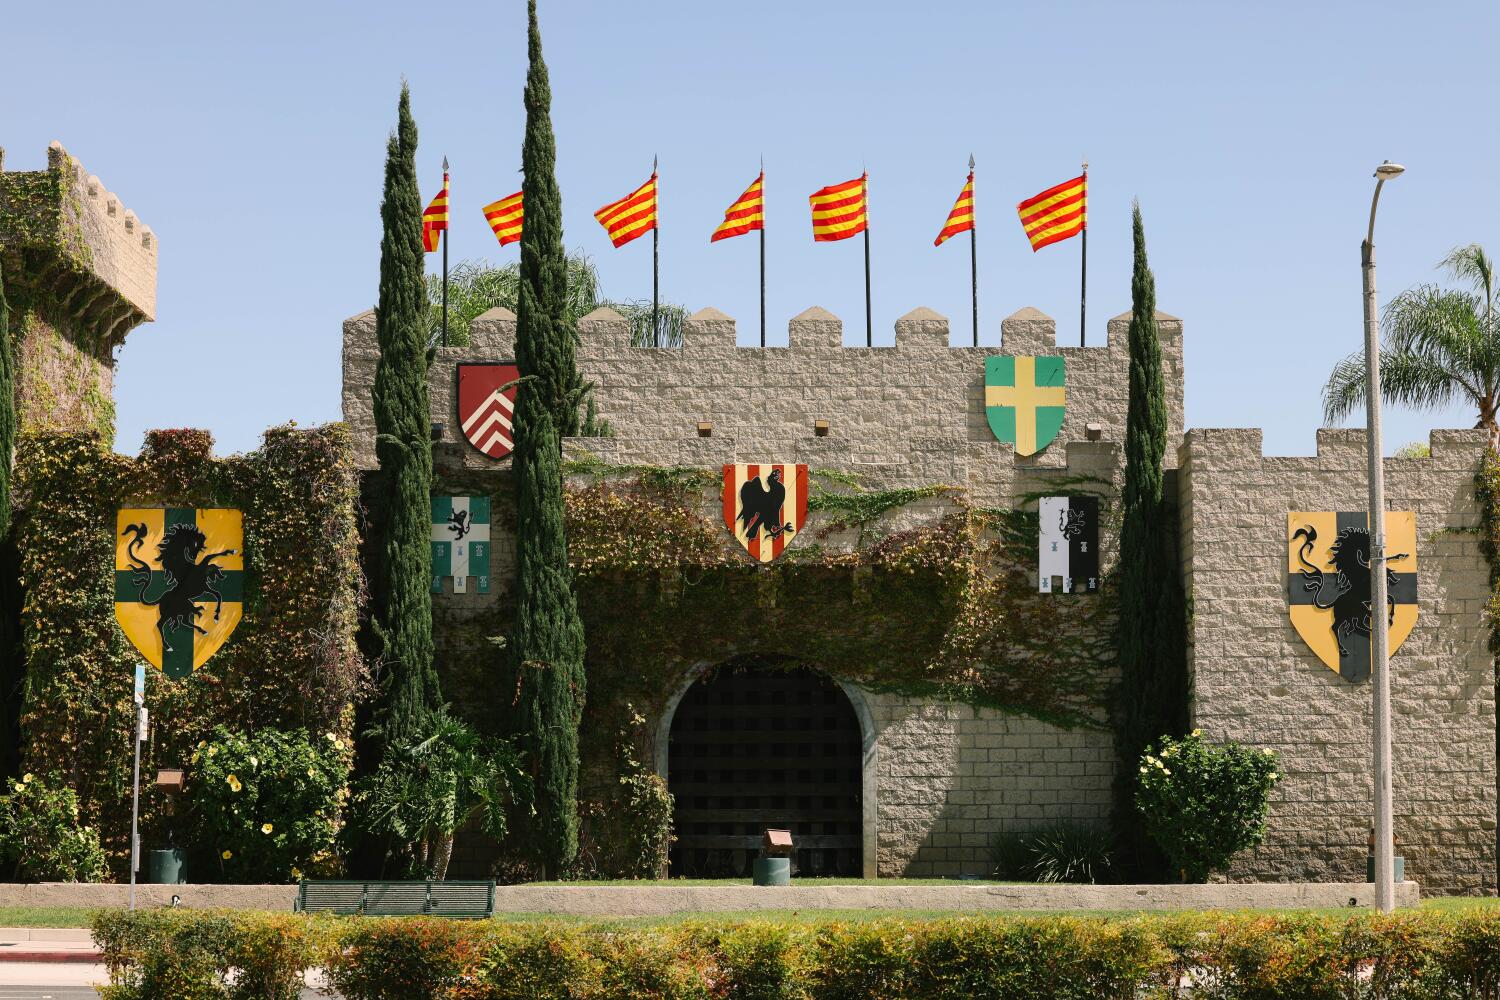 Medieval Times Buena Park employees end strike and will return to work Wednesday